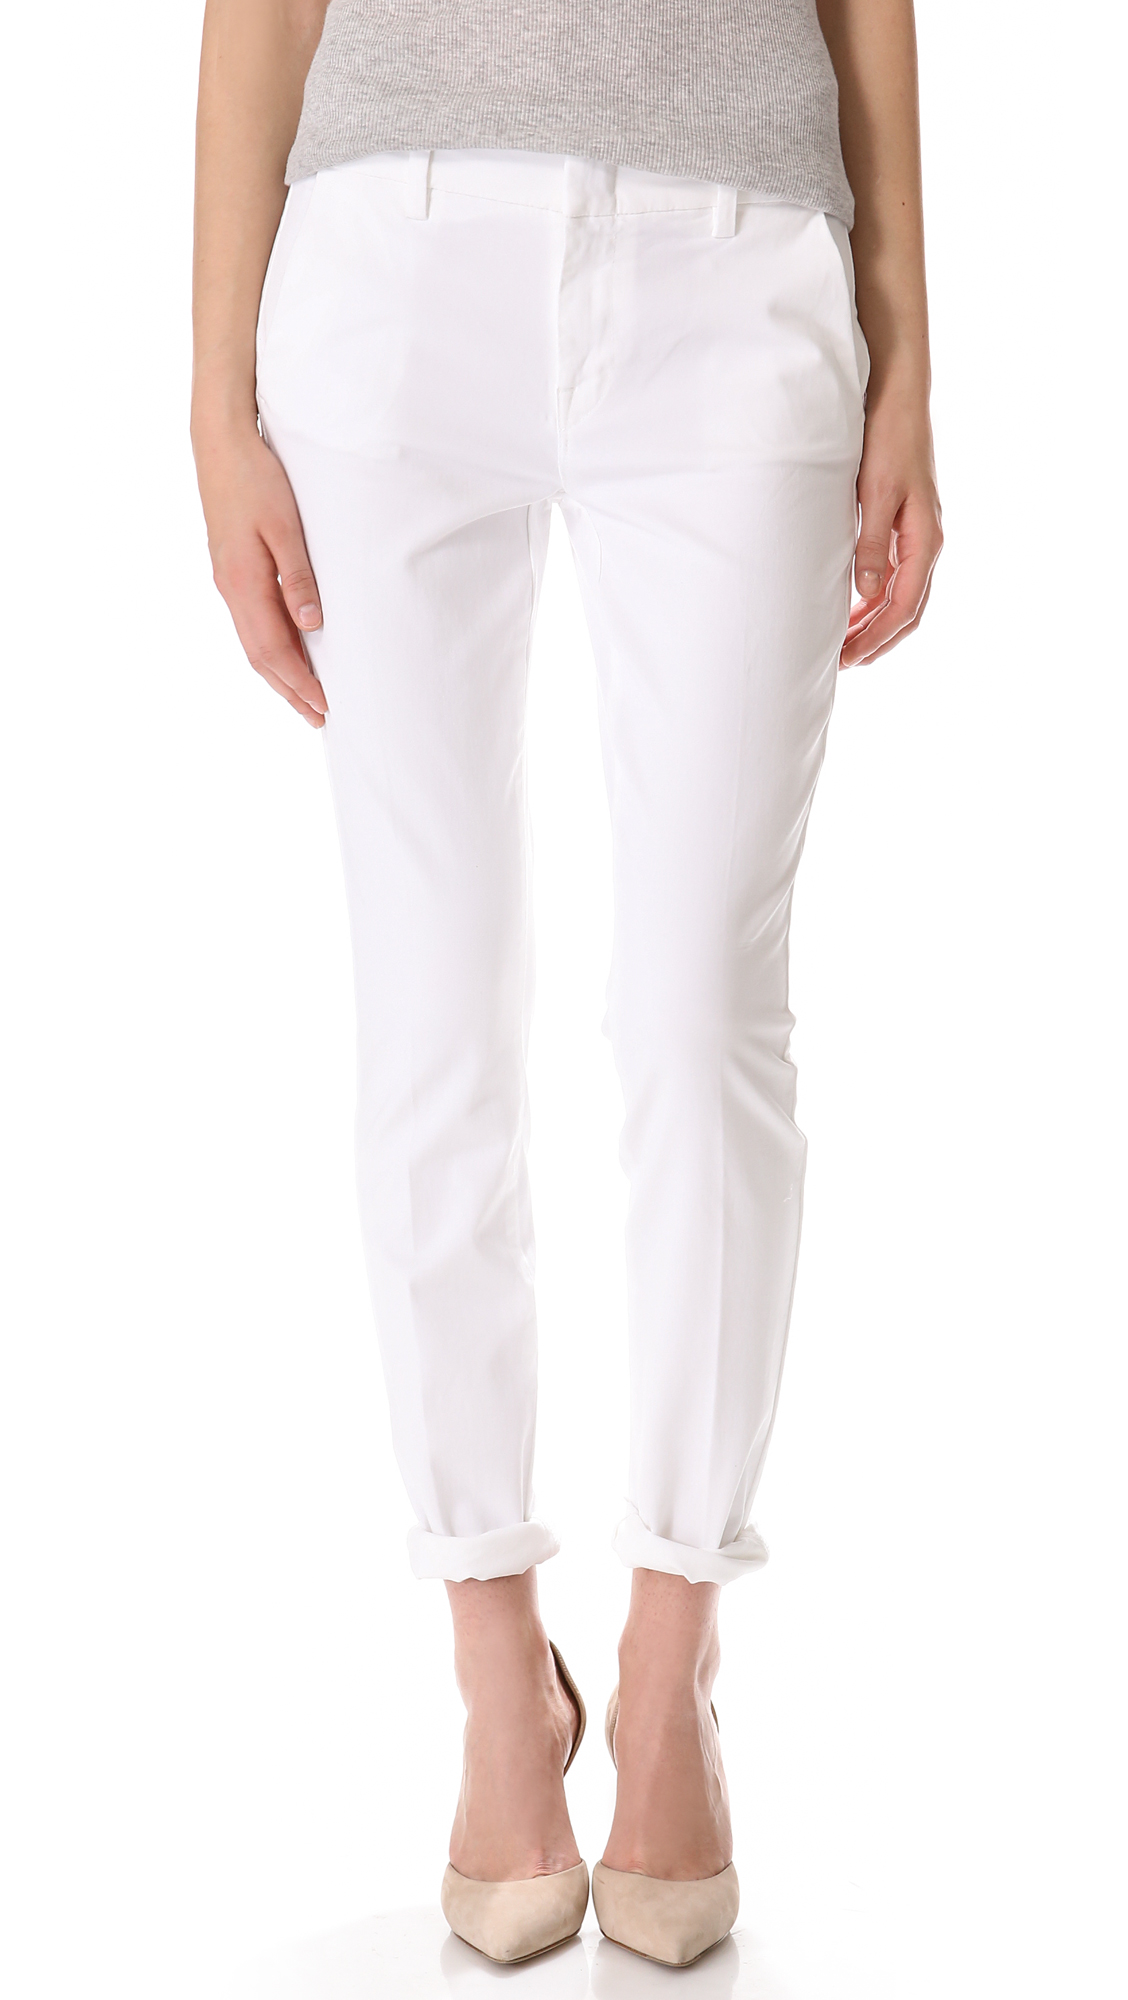 Lyst - Vince Creased Chino Pants in White